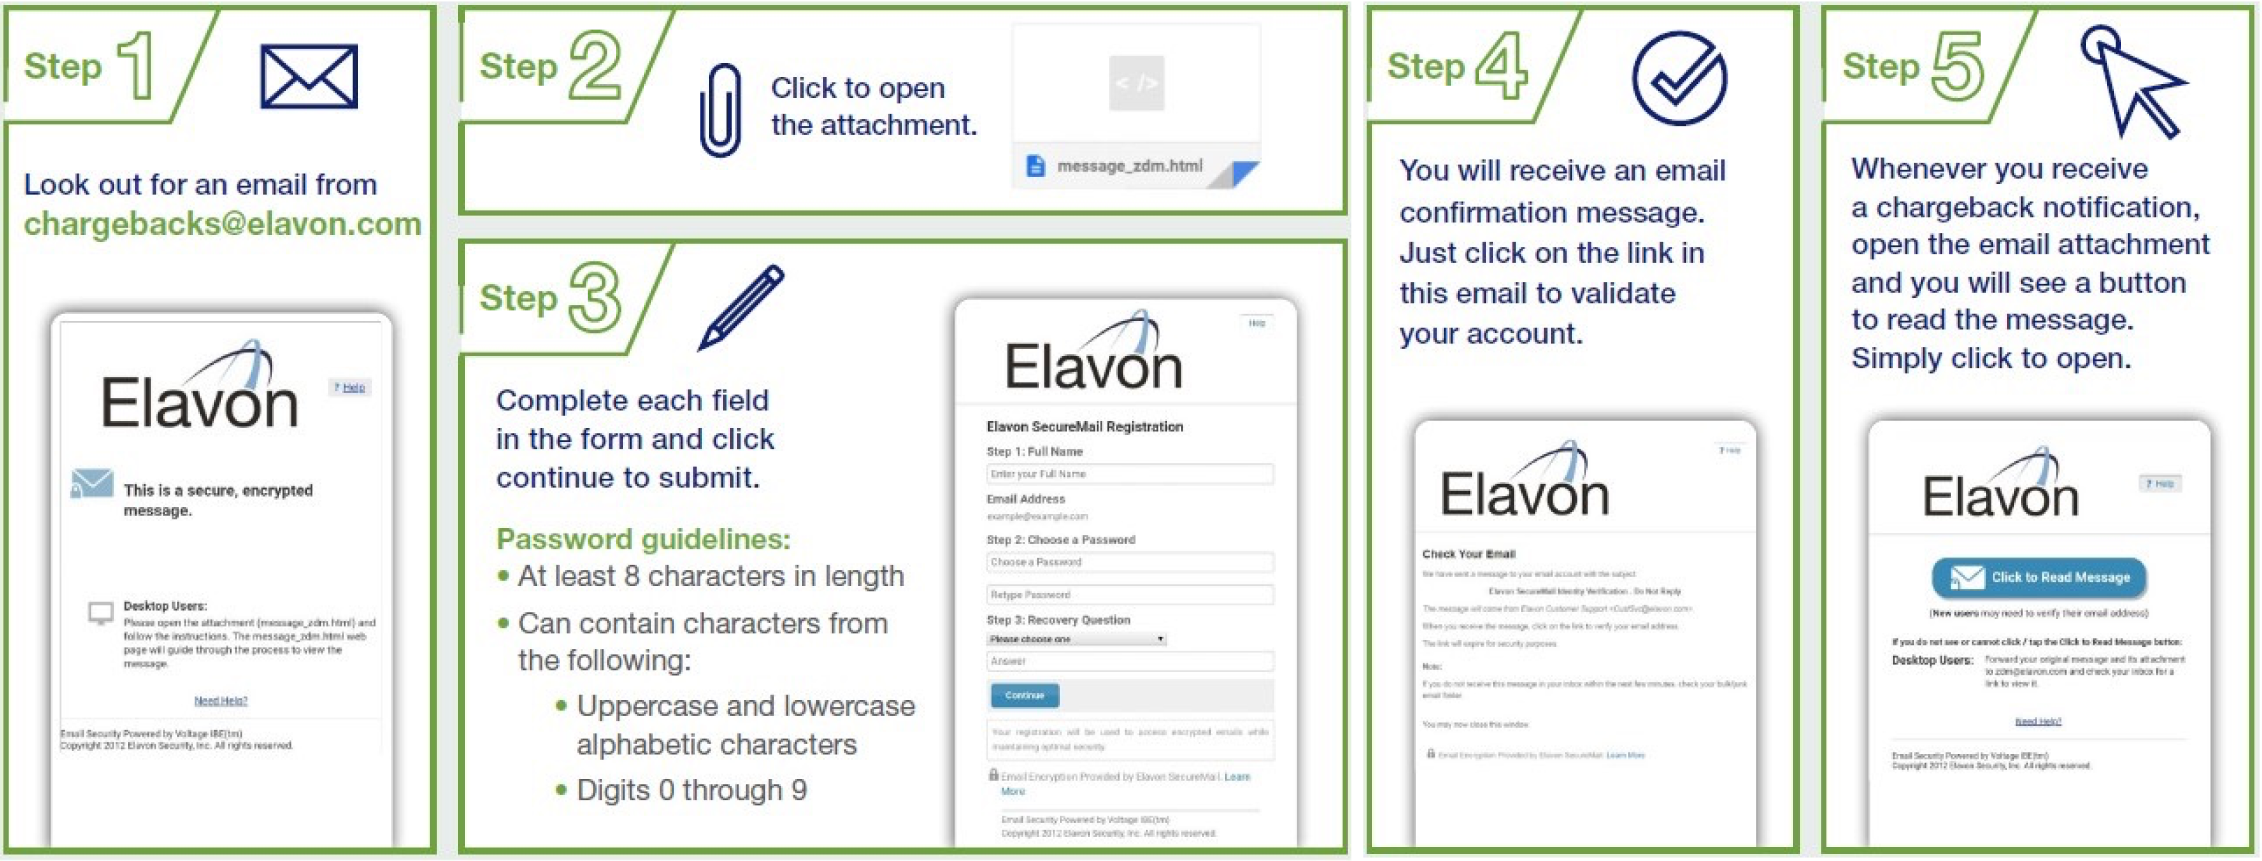 Create your own Elavon Secure Email account